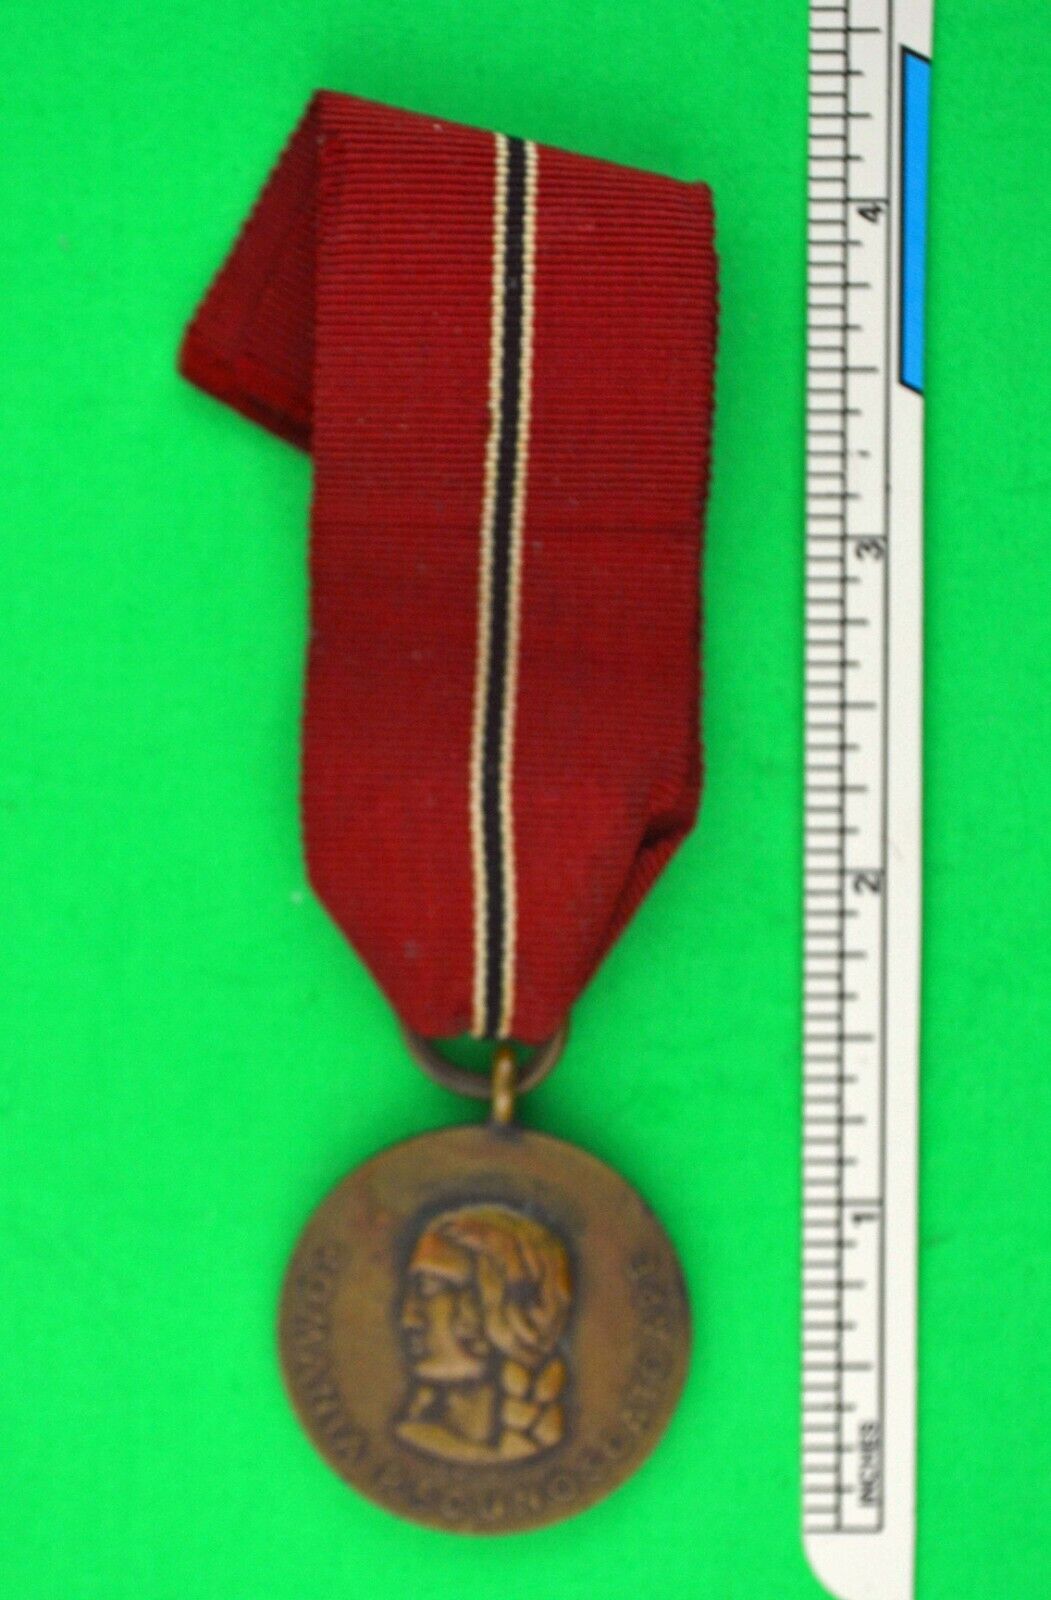 WW2 ROMANIAN CRUSADE AGAINST COMMUNISM SERVICE MEDAL AXIS AWARD WWII